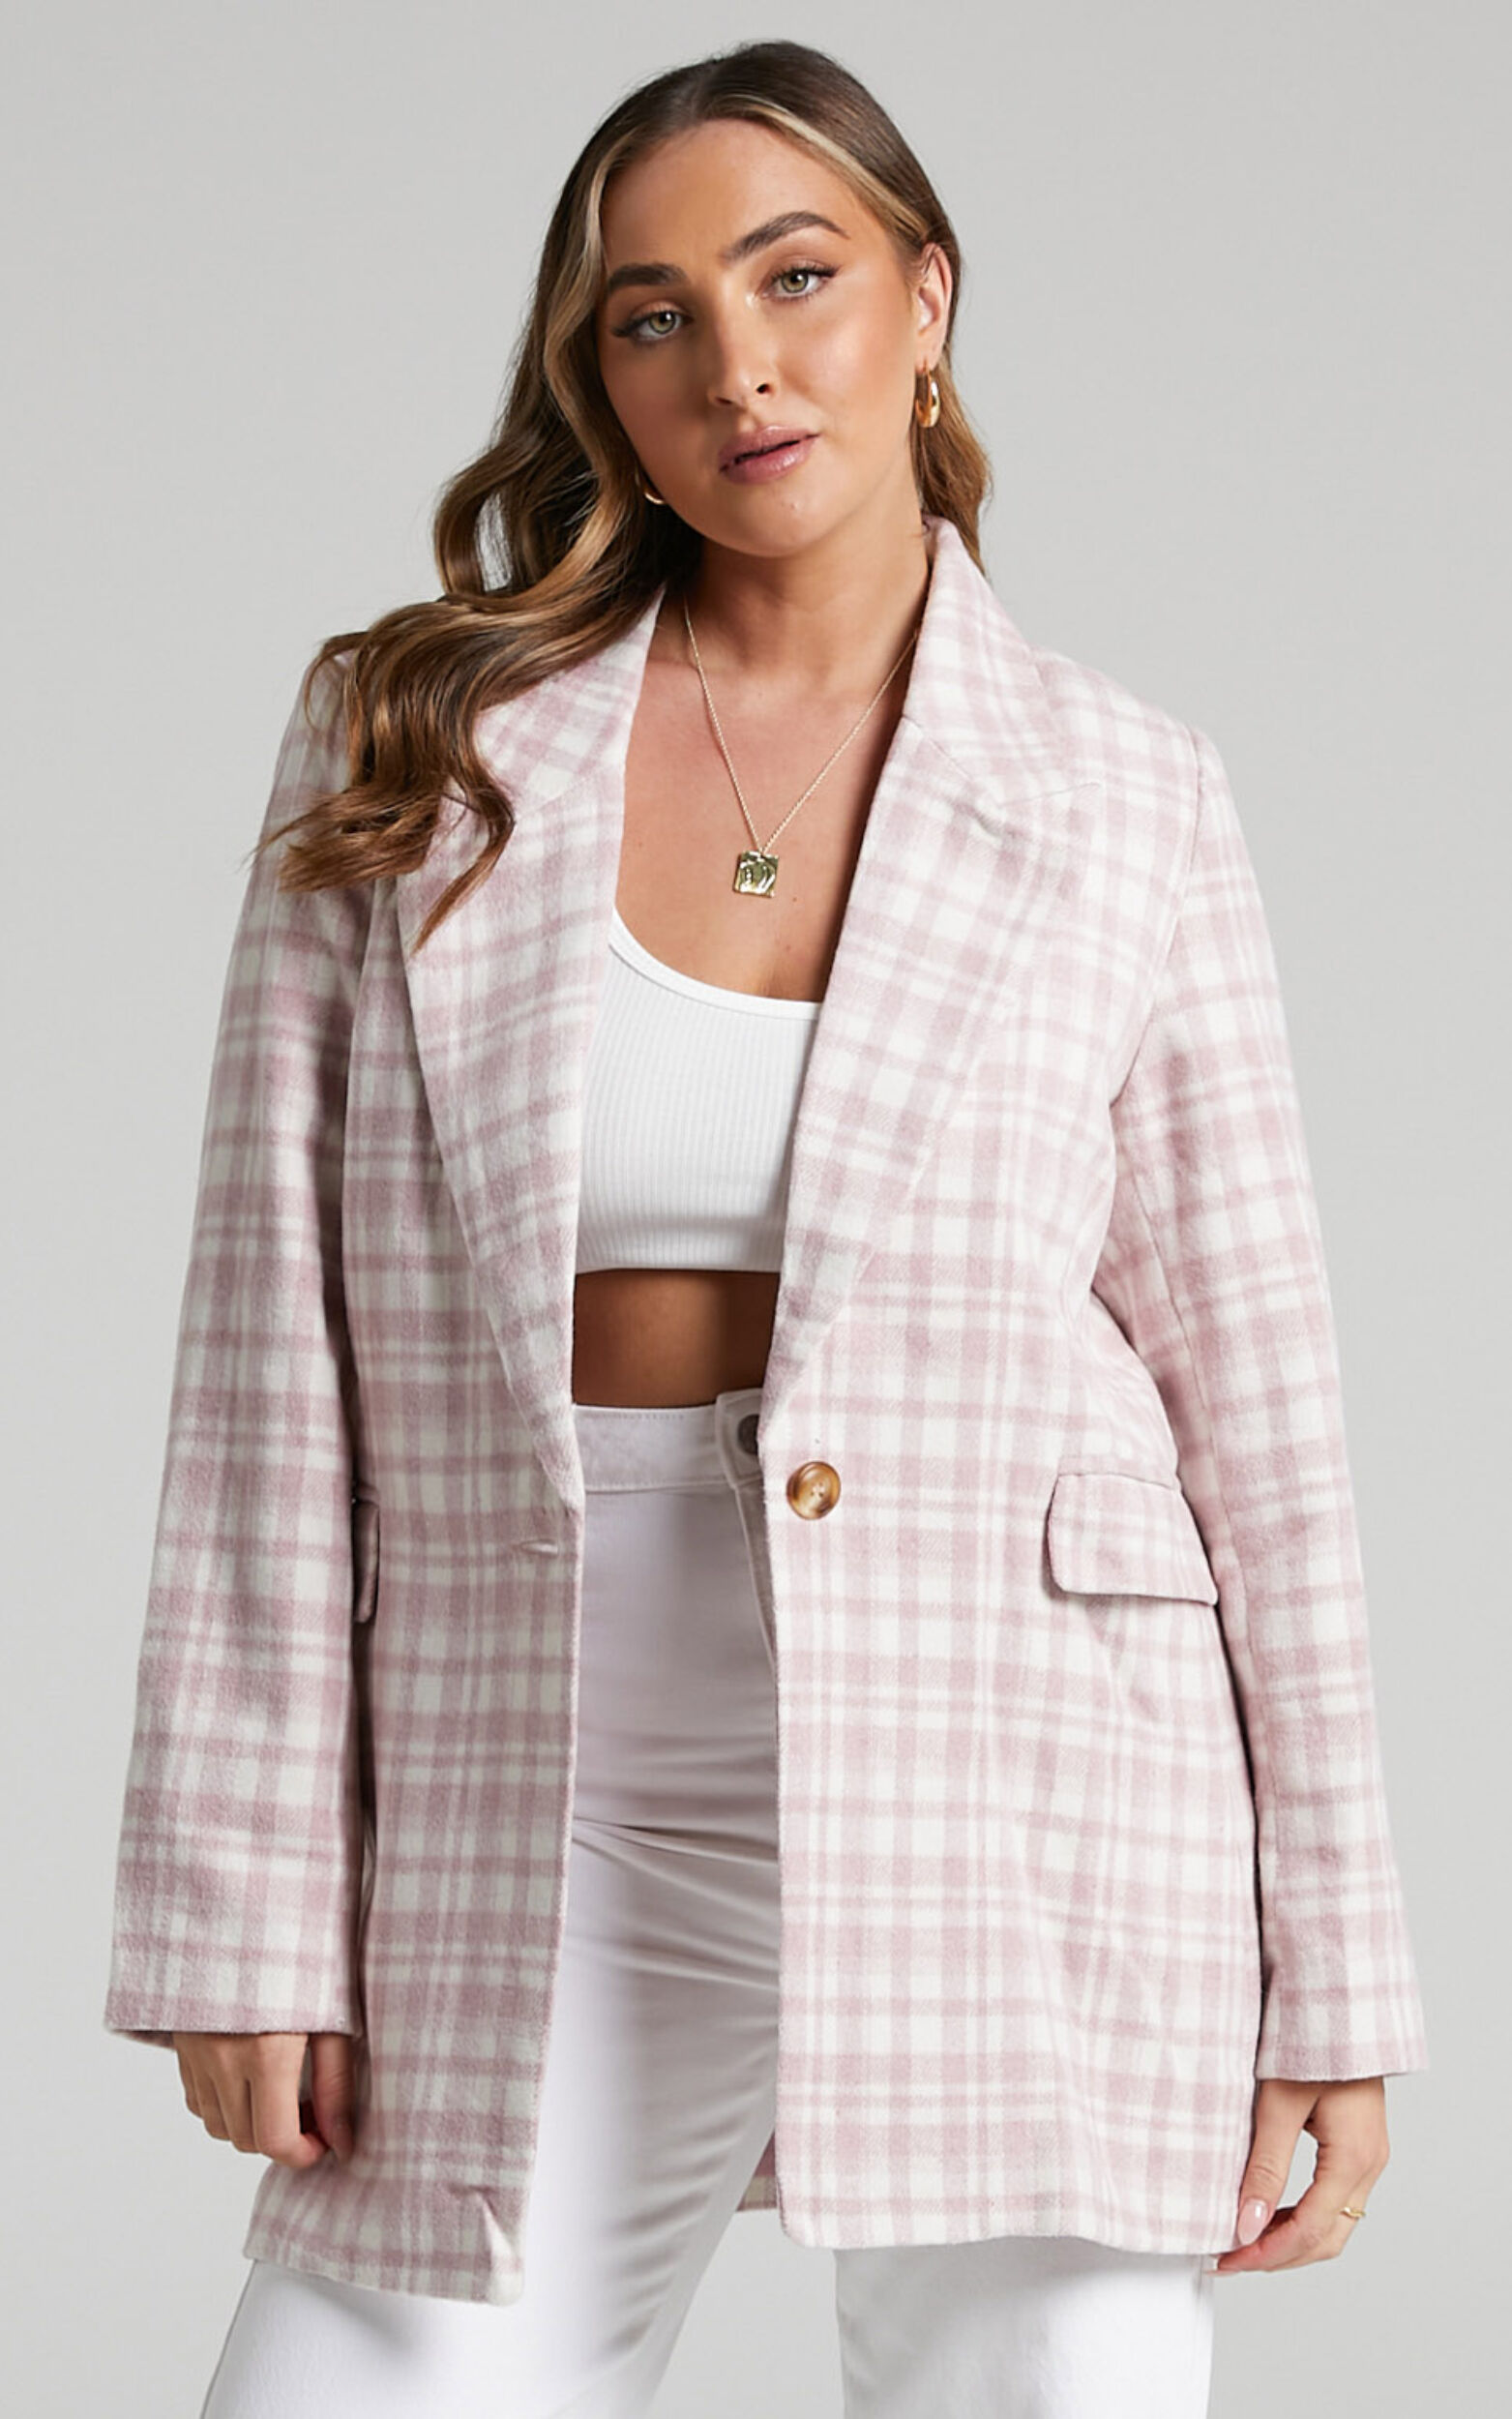 Aquiline Longline Tailored Blazer in Aquiline Clueless Check - 06, PNK1, super-hi-res image number null